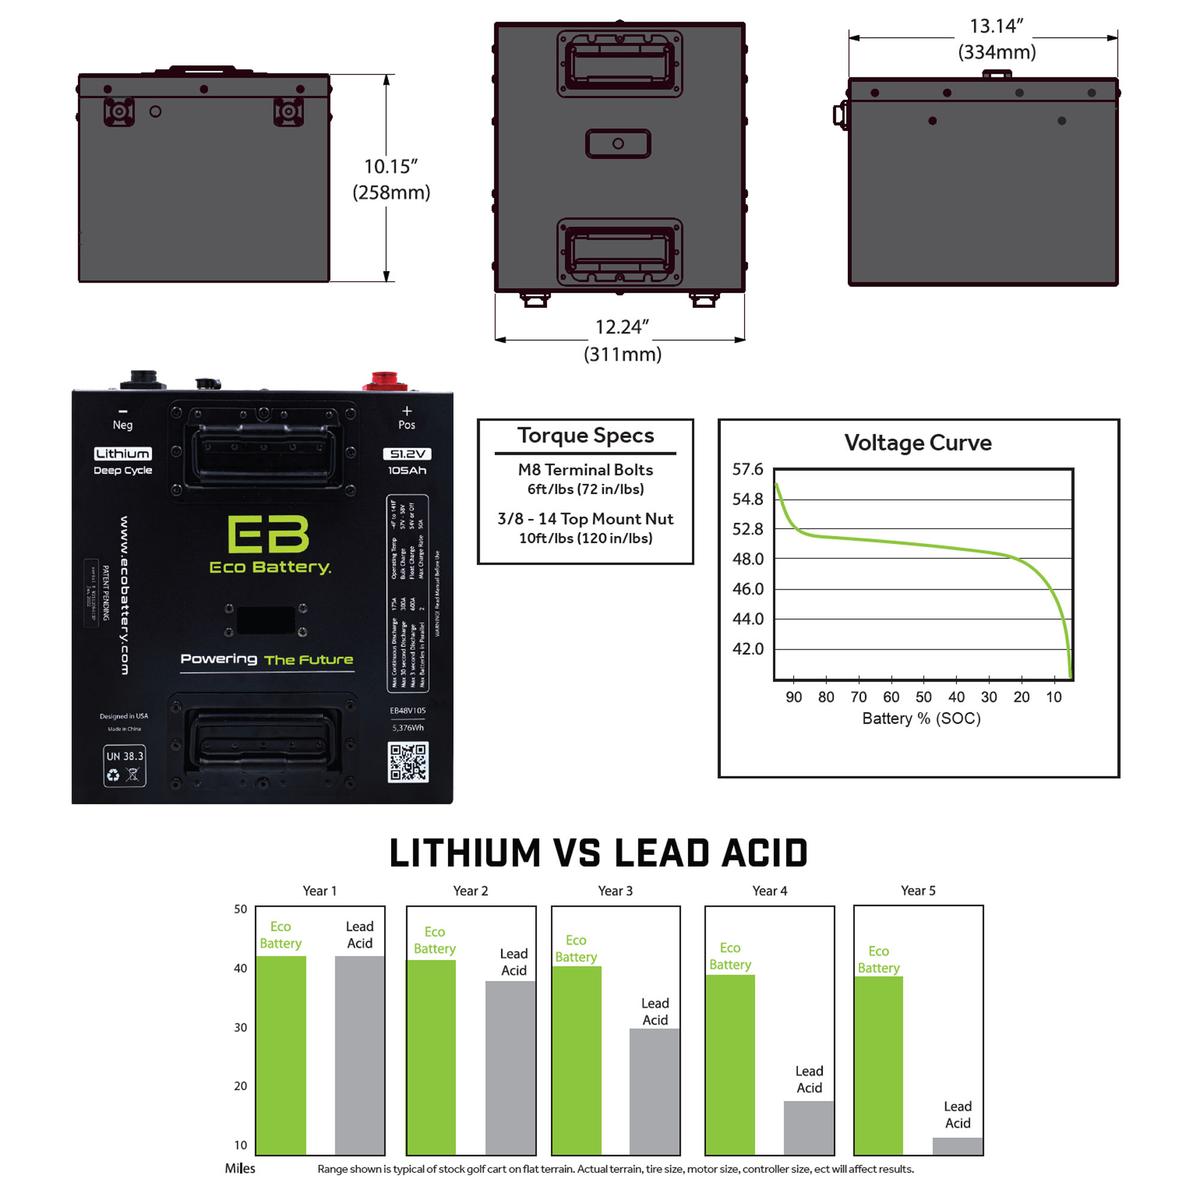 51V 105AH Eco LifePo4 Lithium Battery Kit with 15A Charger – Thru Hole Style Battery